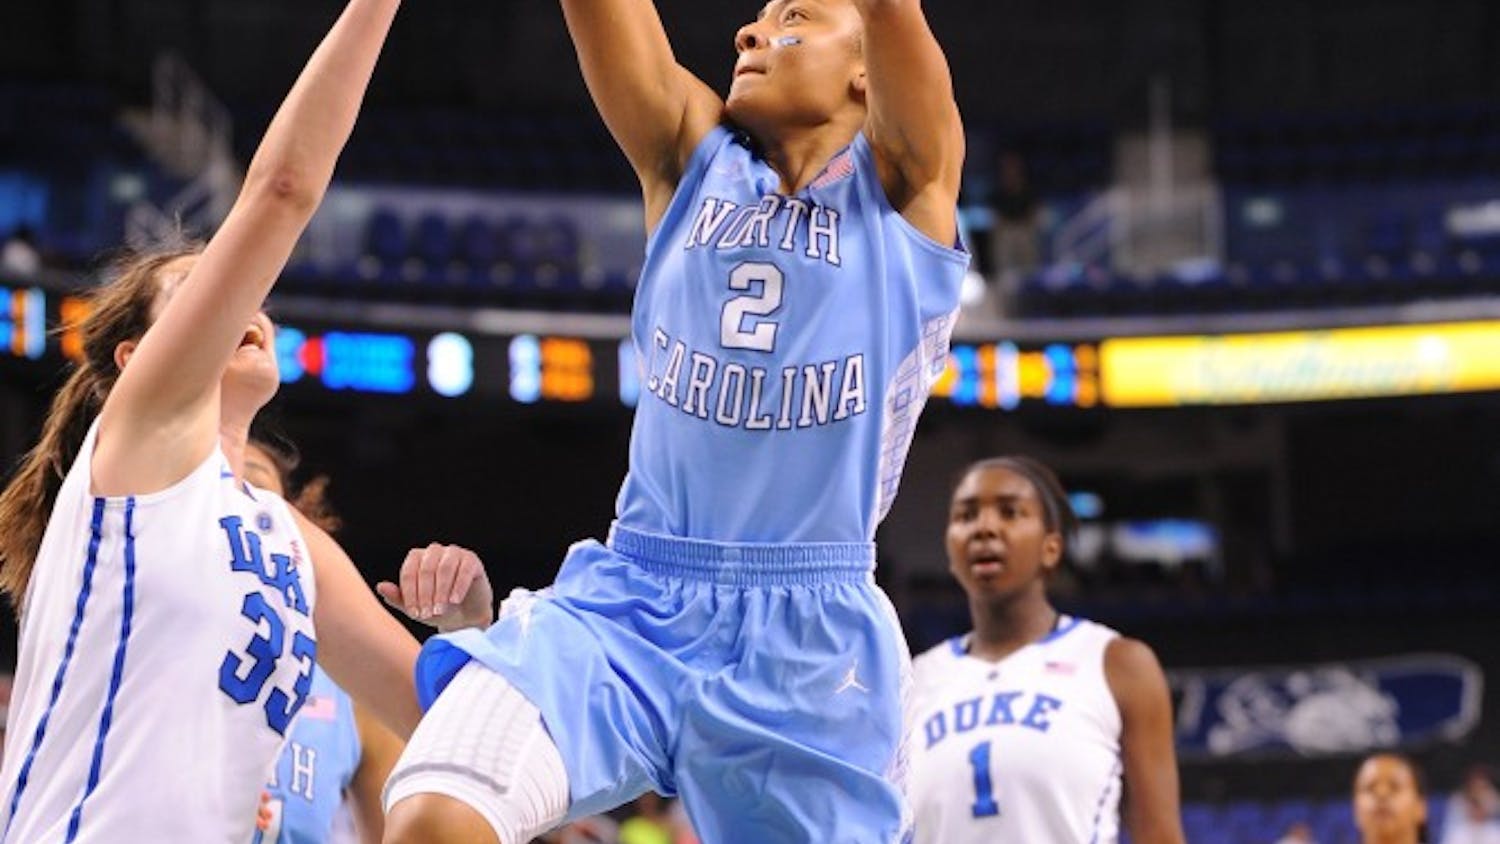 Latifah Coleman (2) of the North Carolina Tar Heels takes a shot over Haley peters (33) of the Duke Blue Devils